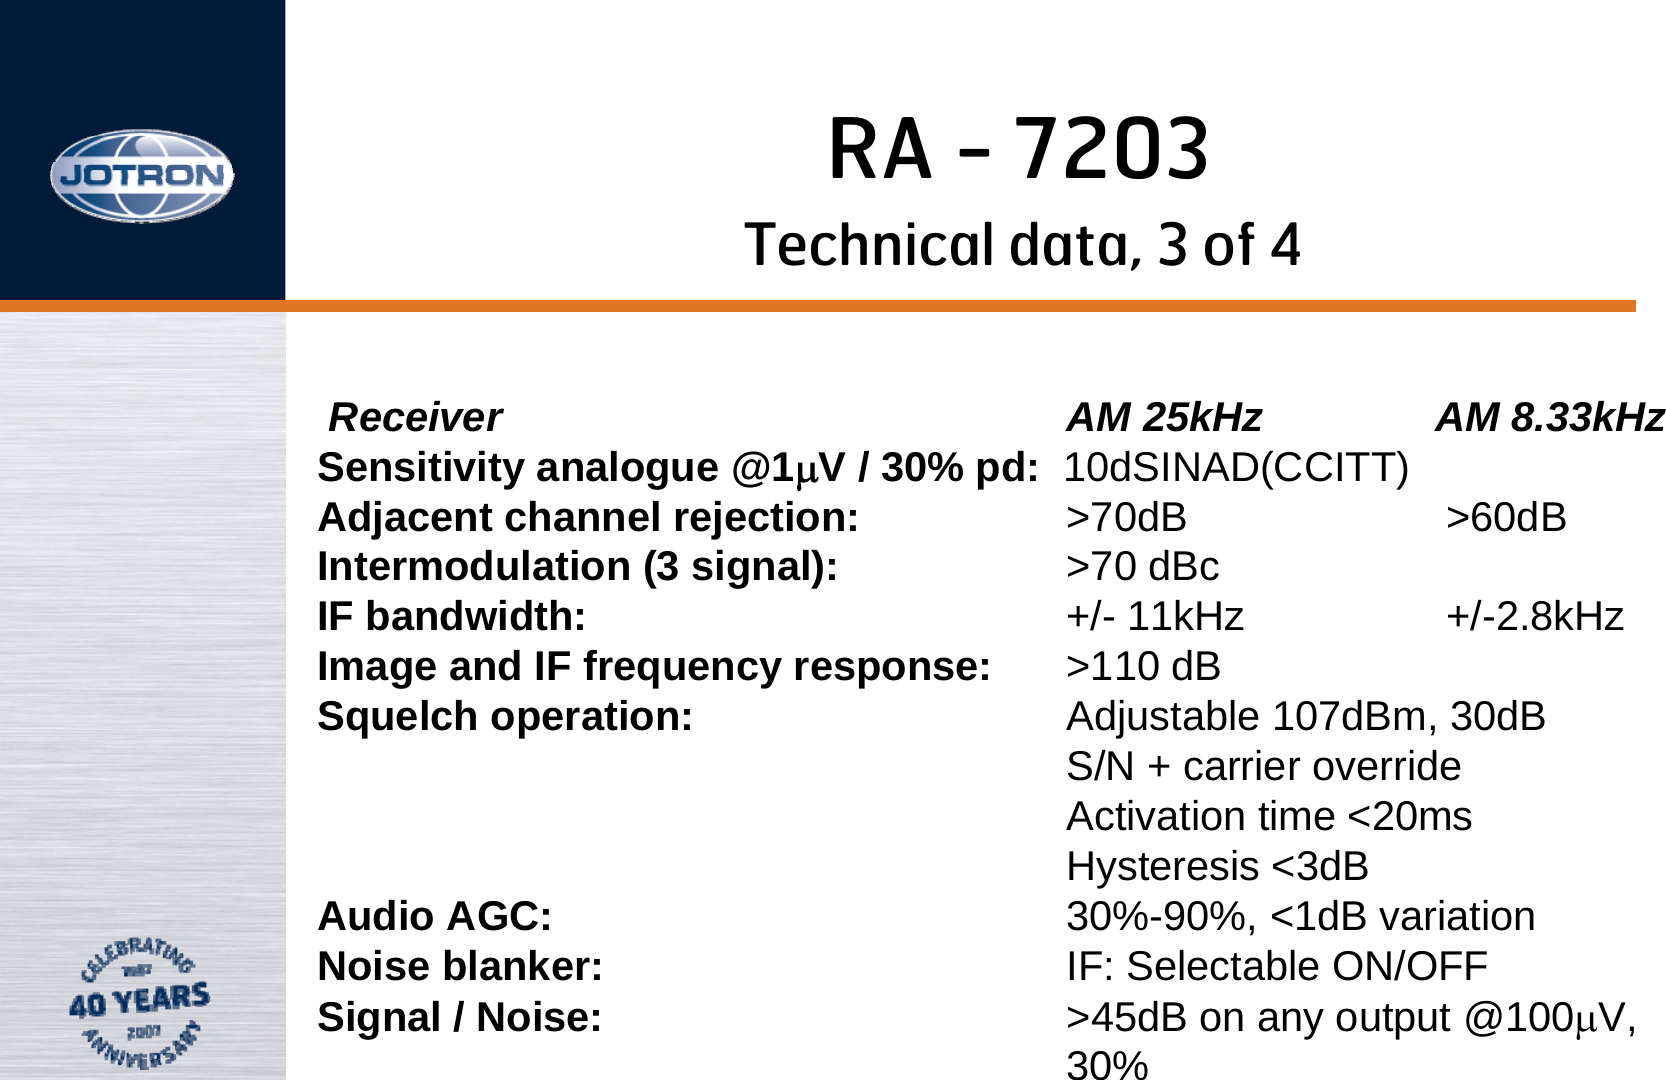 RA - 7203Technical data, 3 of 4Receiver  AM 25kHz   AM 8.33kHzSensitivity analogue @1μV / 30% pd: 10dSINAD(CCITT)Adjacent channel rejection: &gt;70dB       &gt;60dB  Intermodulation (3 signal): &gt;70 dBcIF bandwidth: +/- 11kHz         +/-2.8kHz       Image and IF frequency response: &gt;110 dB                           Squelch operation: Adjustable 107dBm, 30dB       S/N + carrier override       Activation time &lt;20ms                Hysteresis &lt;3dB                  Audio AGC: 30%-90%, &lt;1dB variation      Noise blanker: IF: Selectable ON/OFF        Signal / Noise: &gt;45dB on any output @100μV, 30%